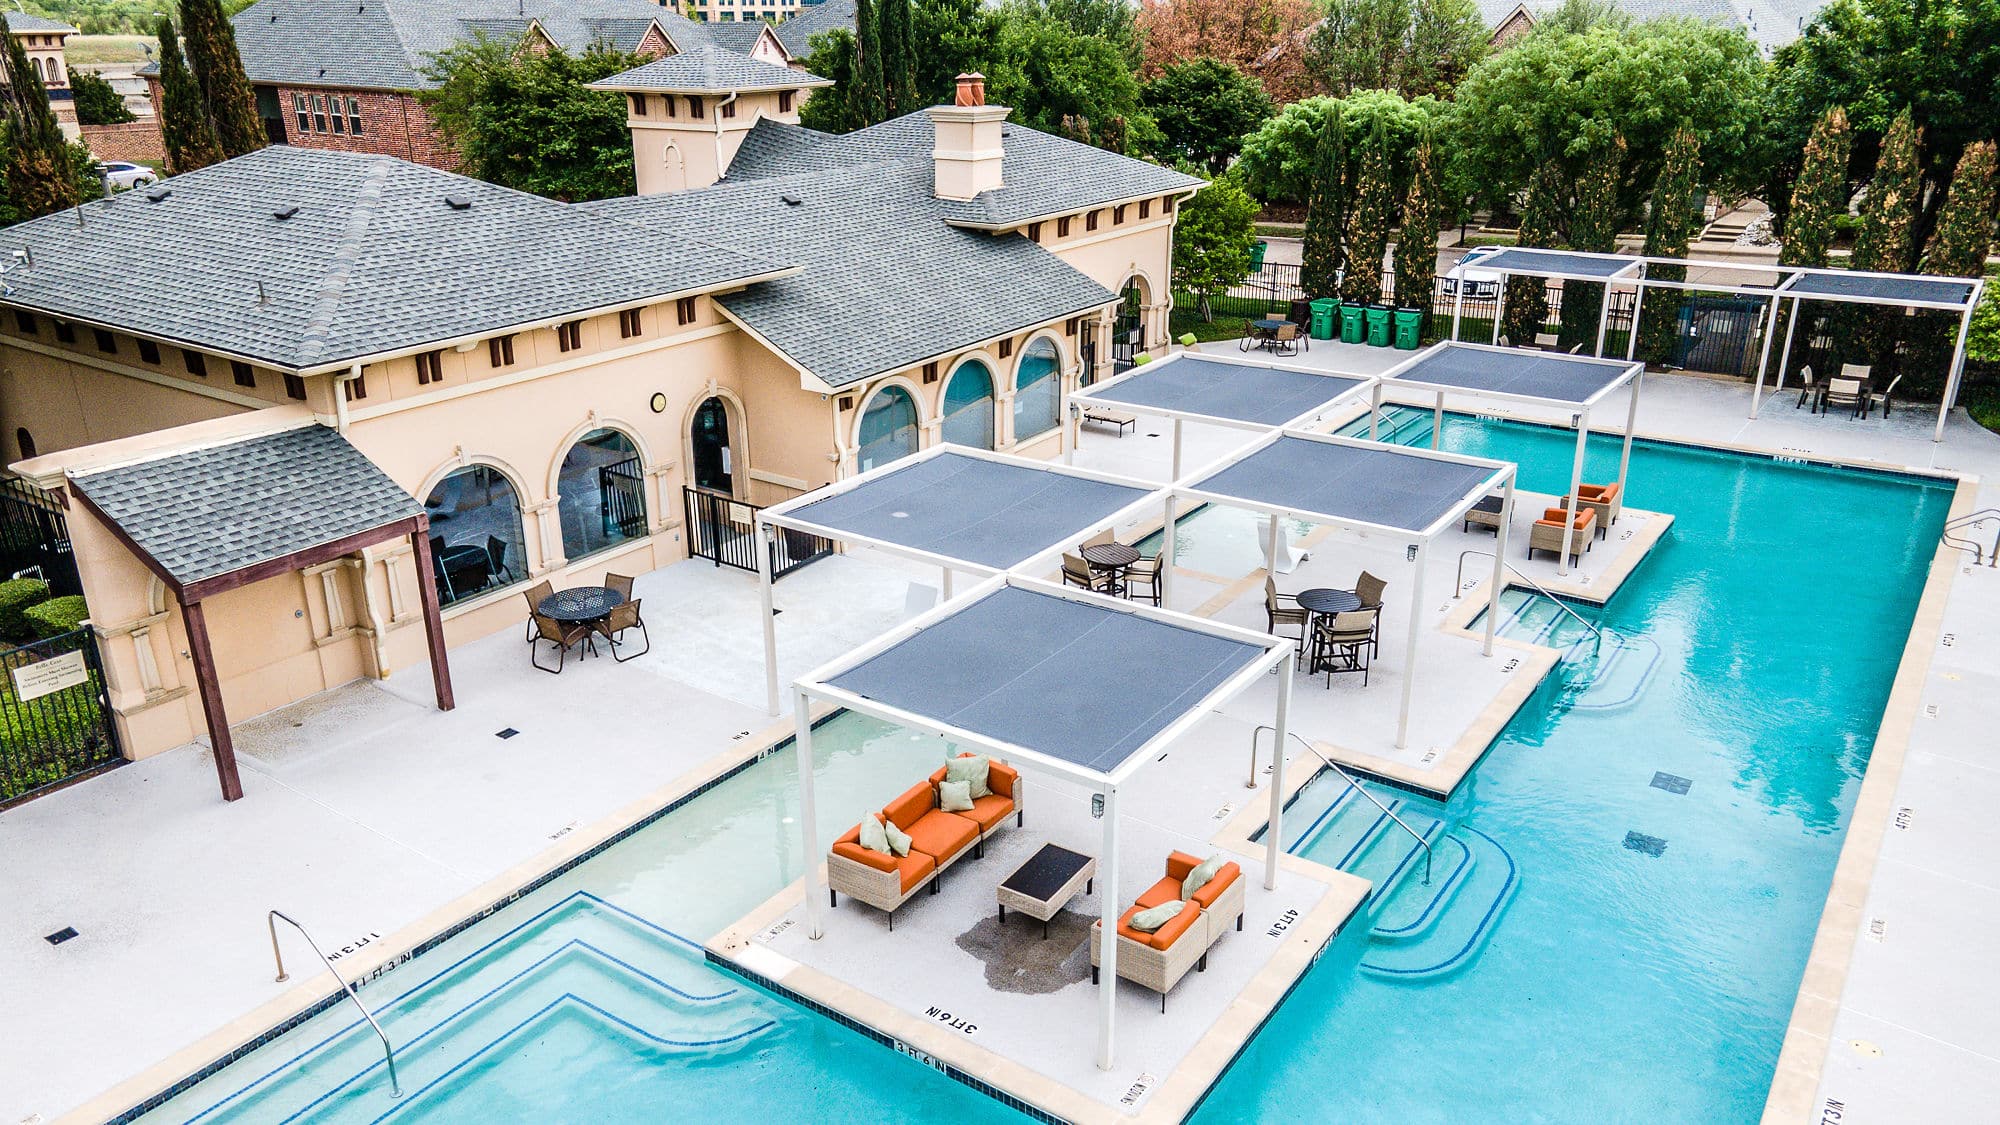 Birds Eye view of pool behind a large house.